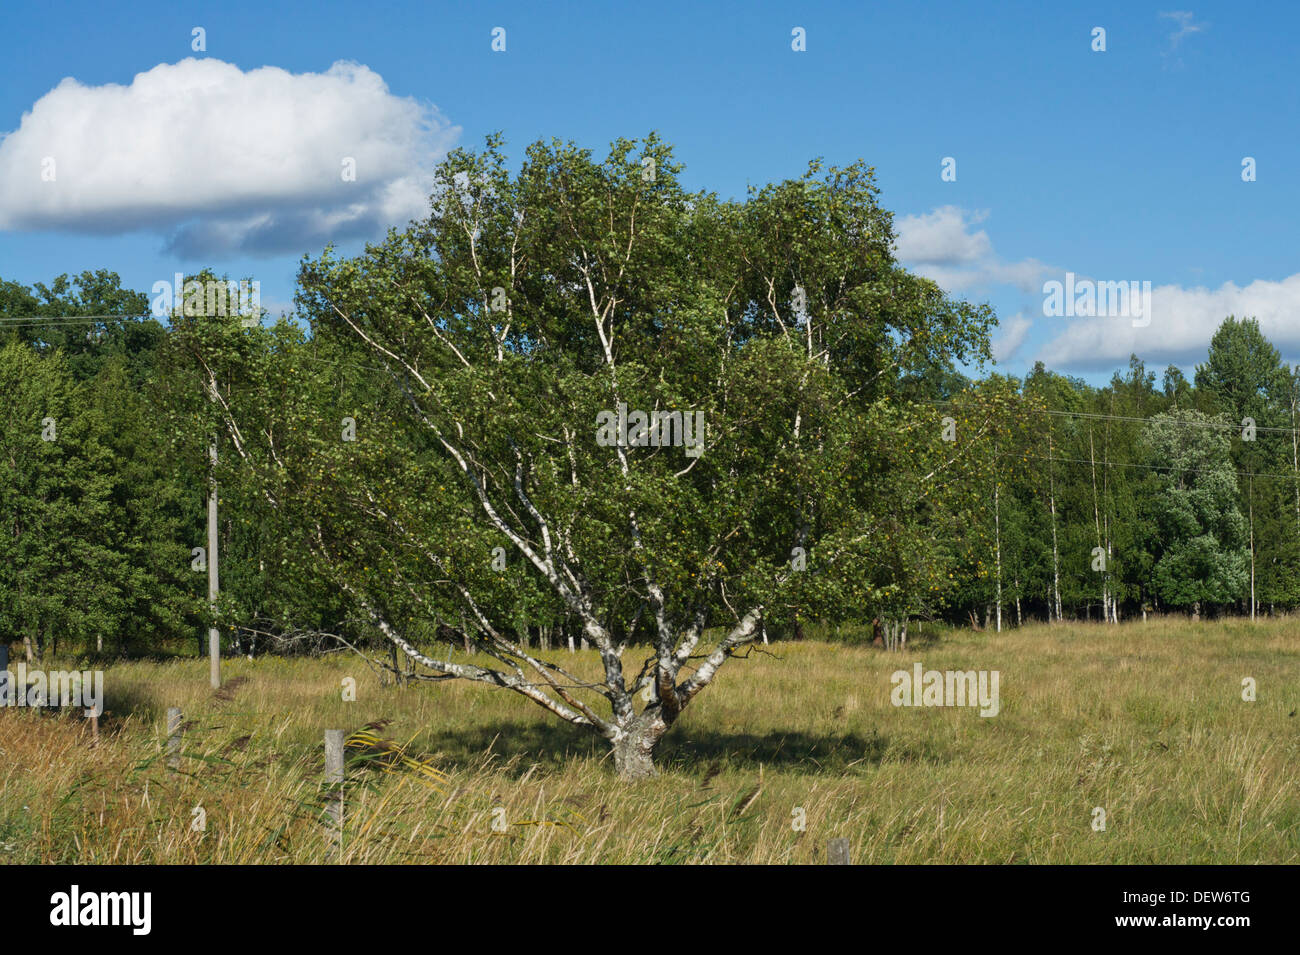 Birch tree in a Field with summer skies Stock Photo